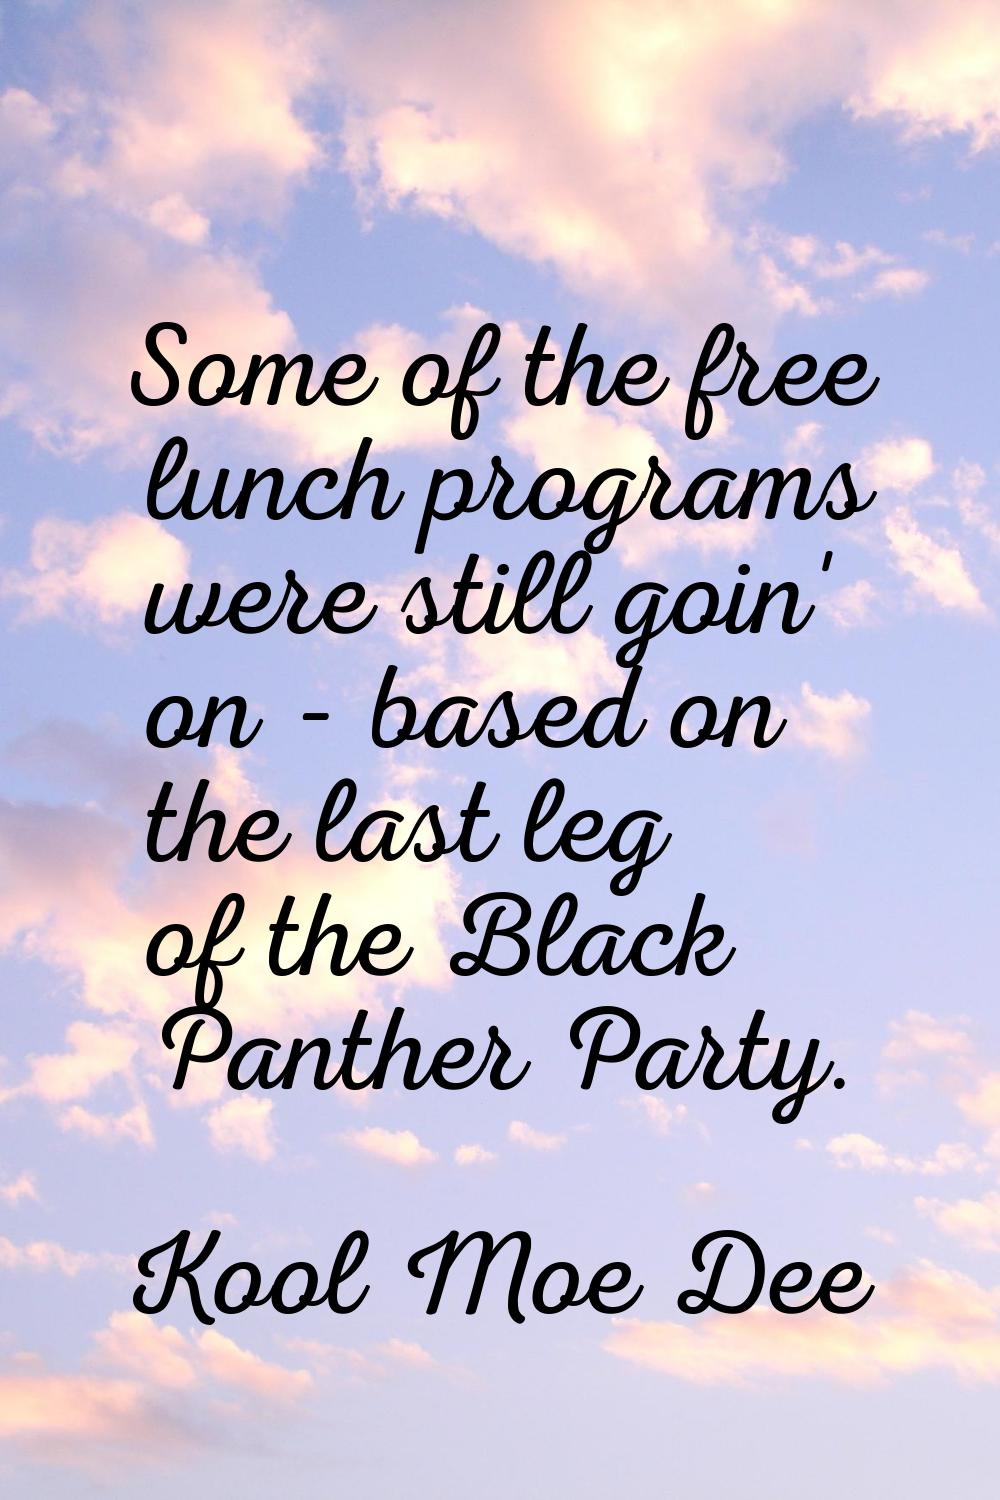 Some of the free lunch programs were still goin' on - based on the last leg of the Black Panther Pa